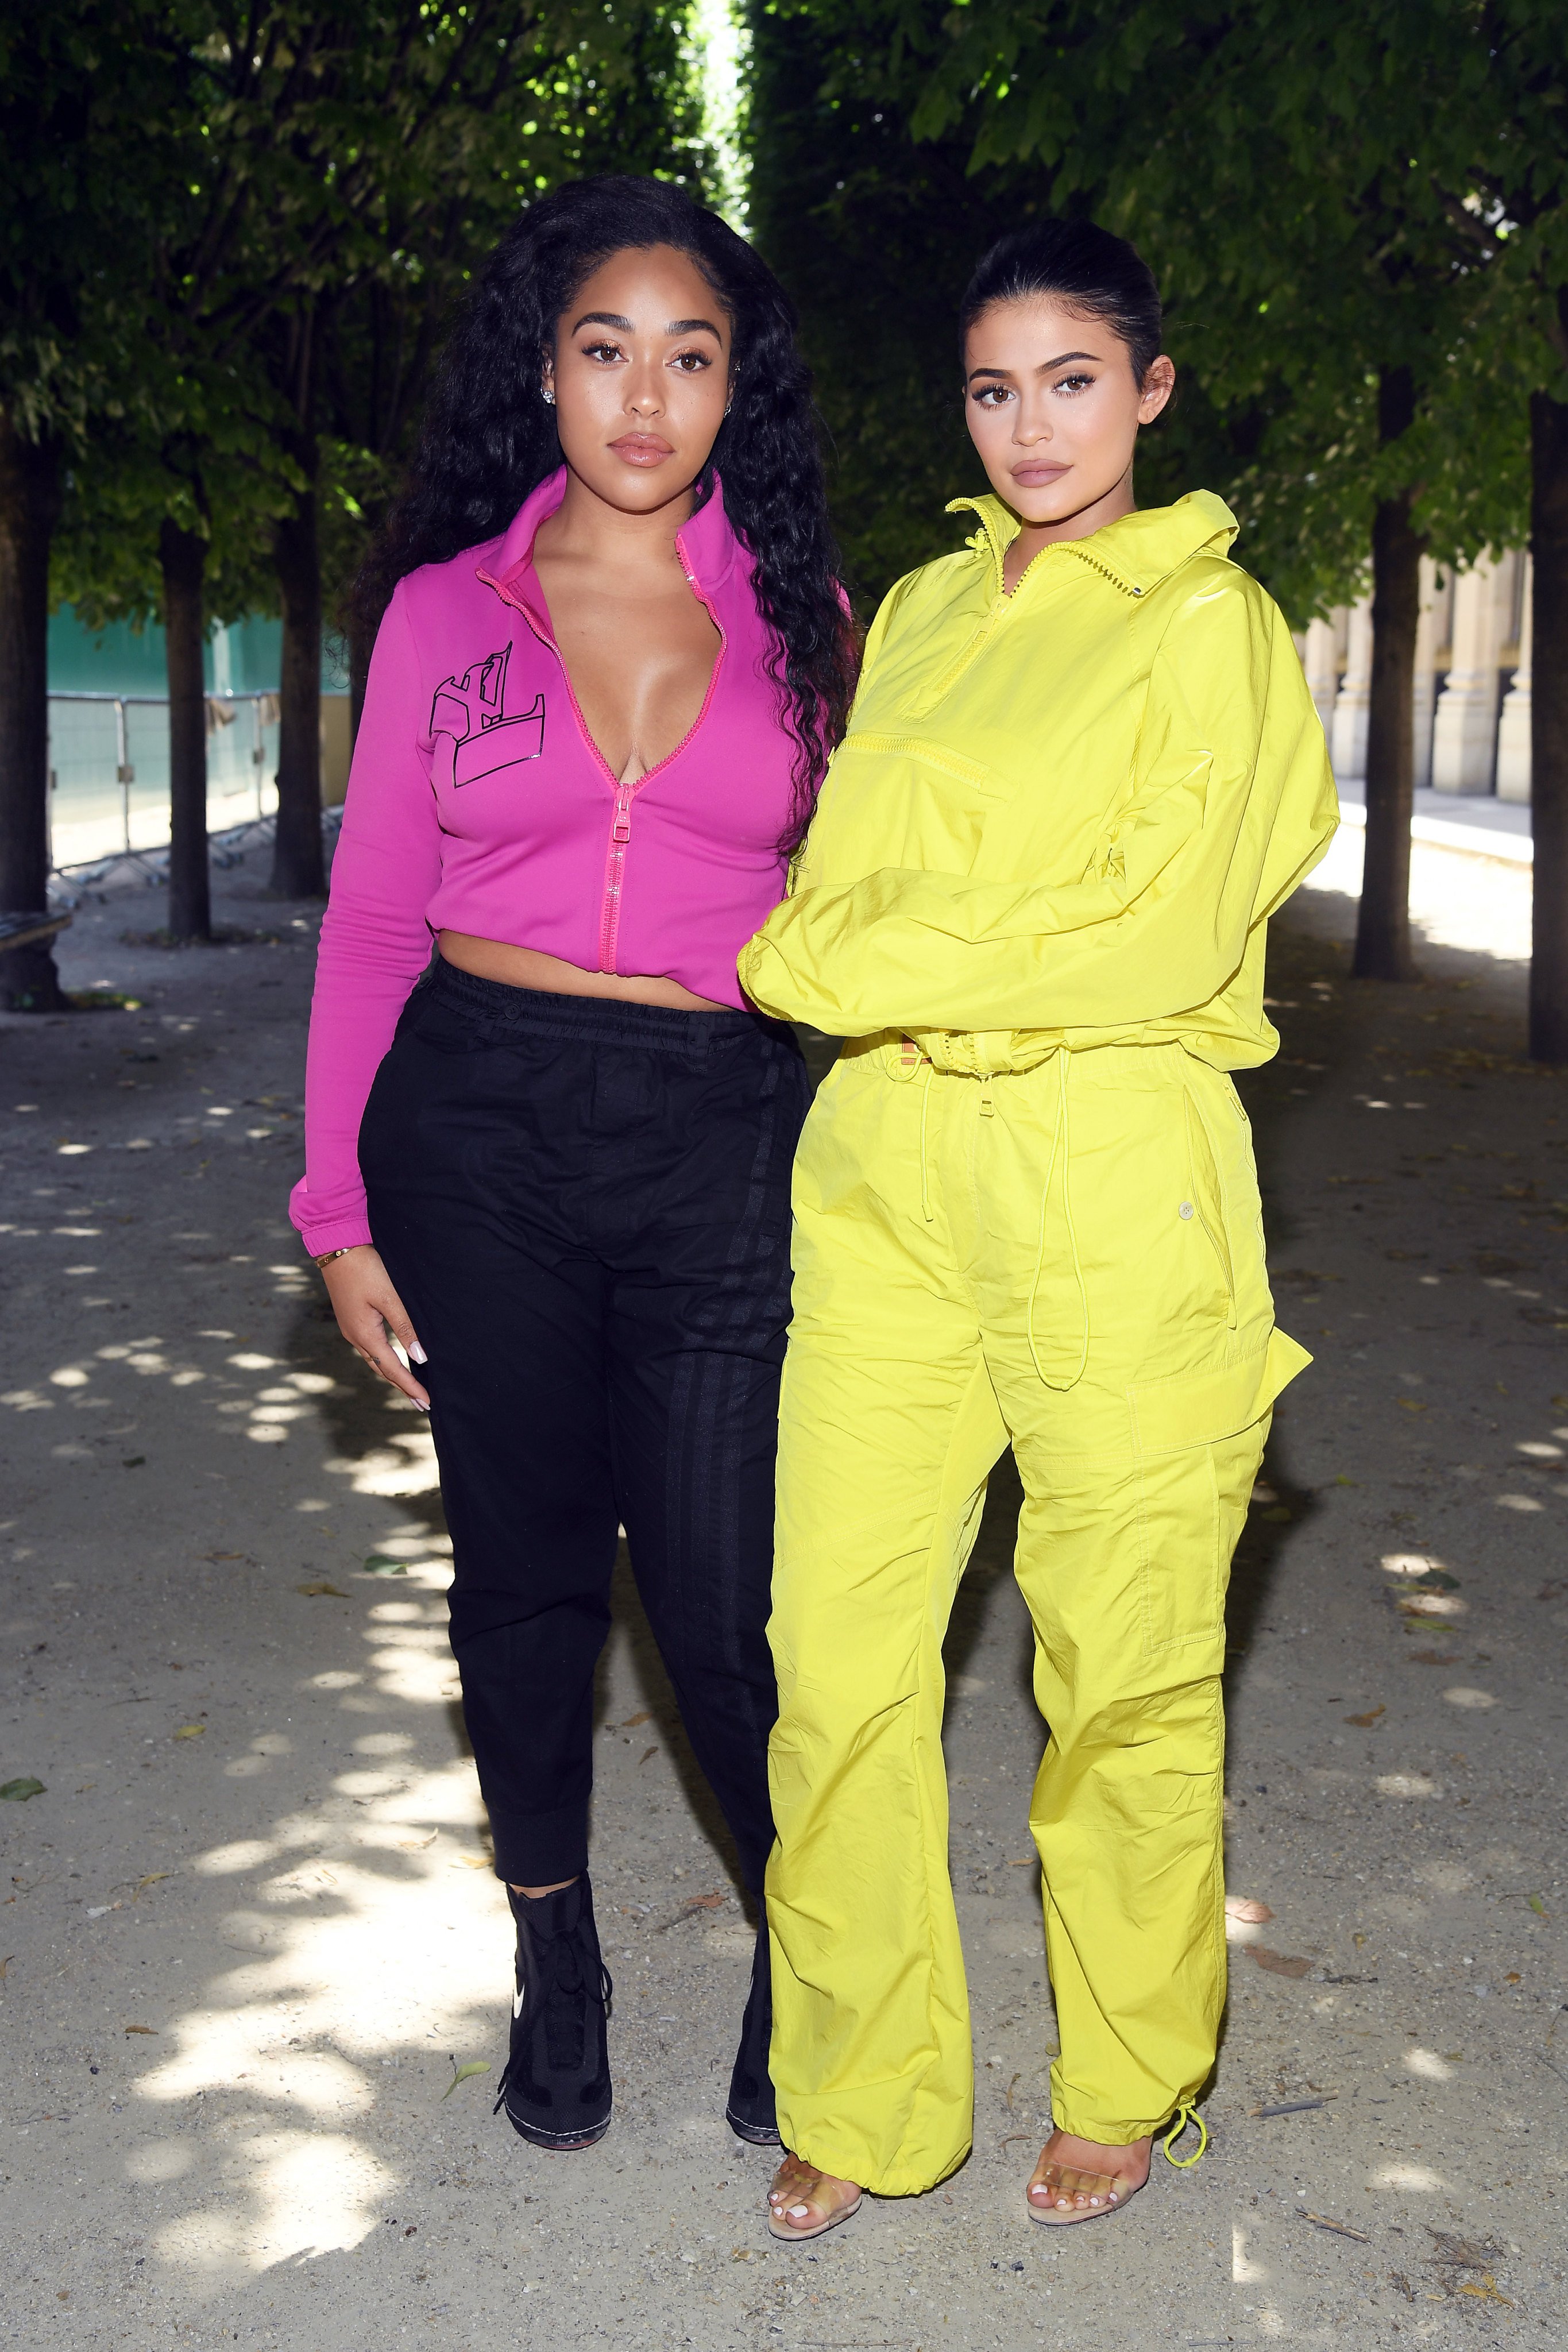 Jordyn Woods and Kylie Jenner used to be best friends – until they got into drama. Photo: Getty Images